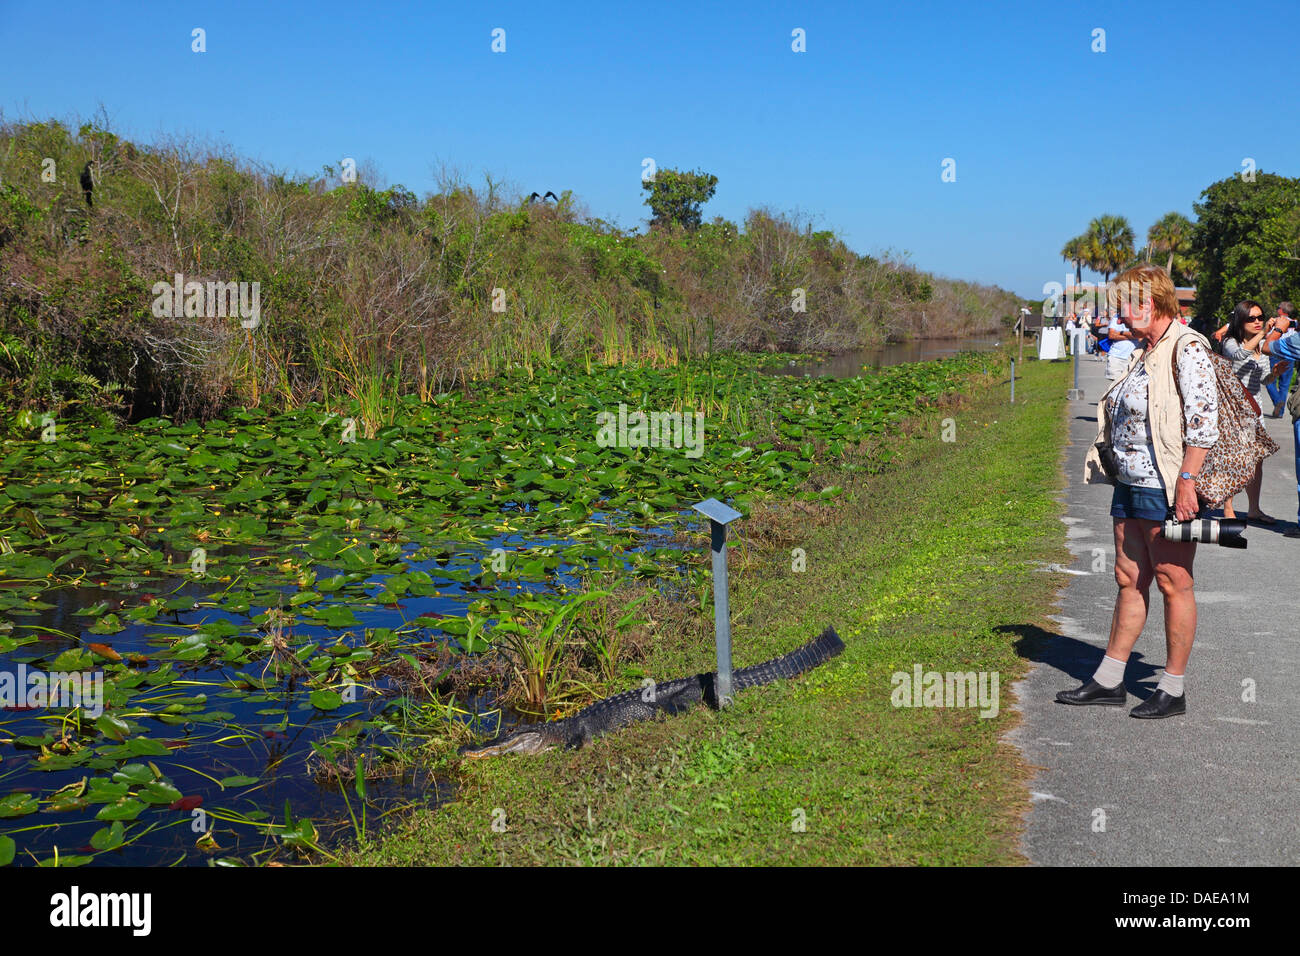 American alligator (Alligator mississippiensis), female tourist looking to an alligator lying beside the path, USA, Florida, Everglades National Park Stock Photo